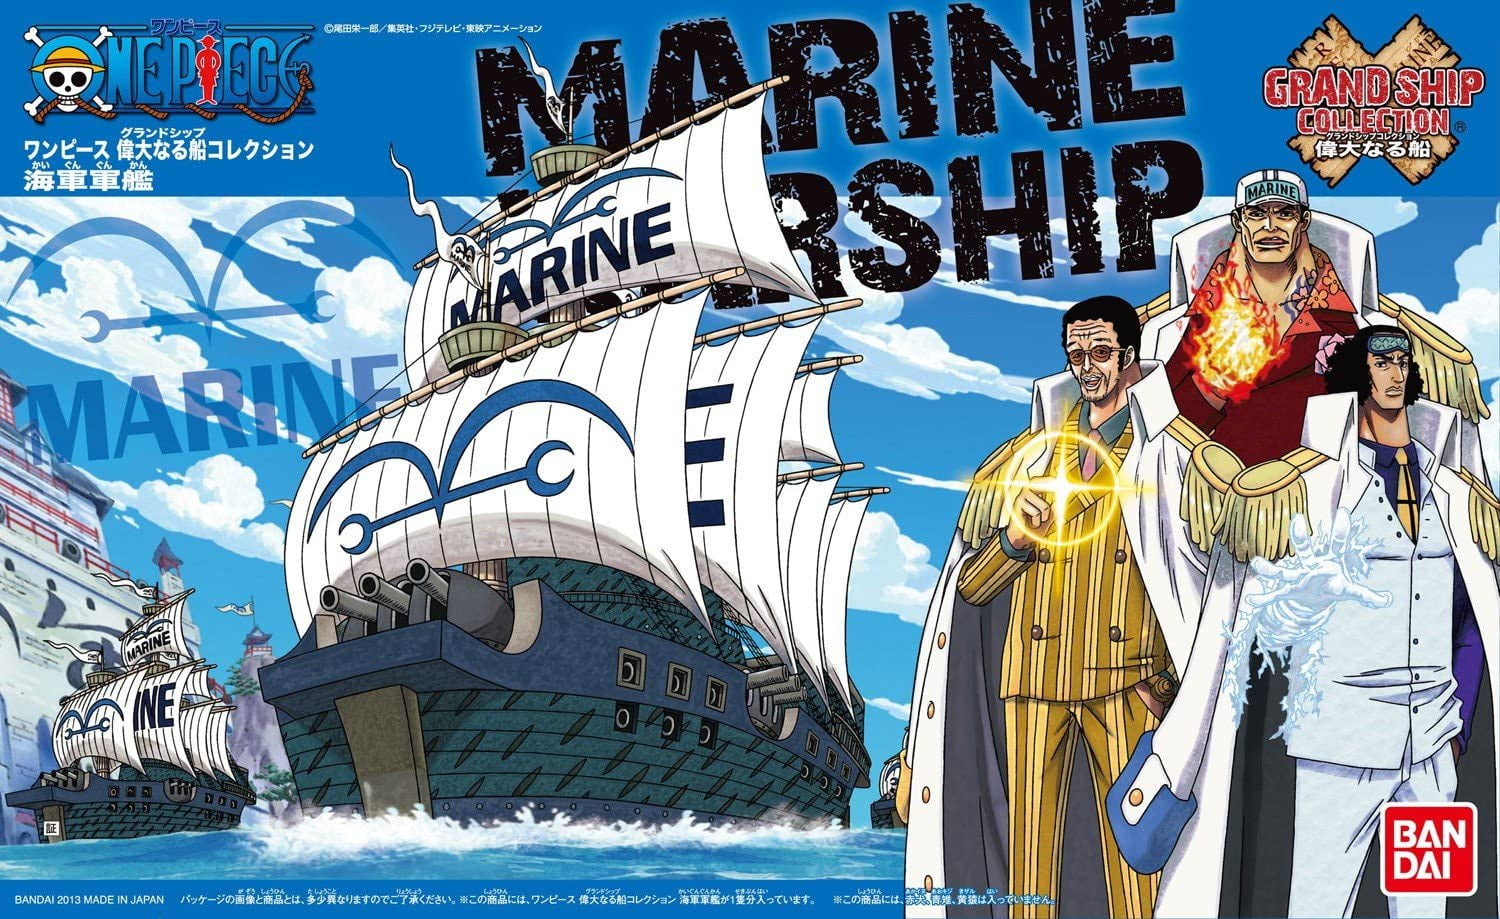 Details about   Bandai ONE PIECE GRAND SHIP COLLECTION 08 Garp's Warship 183661